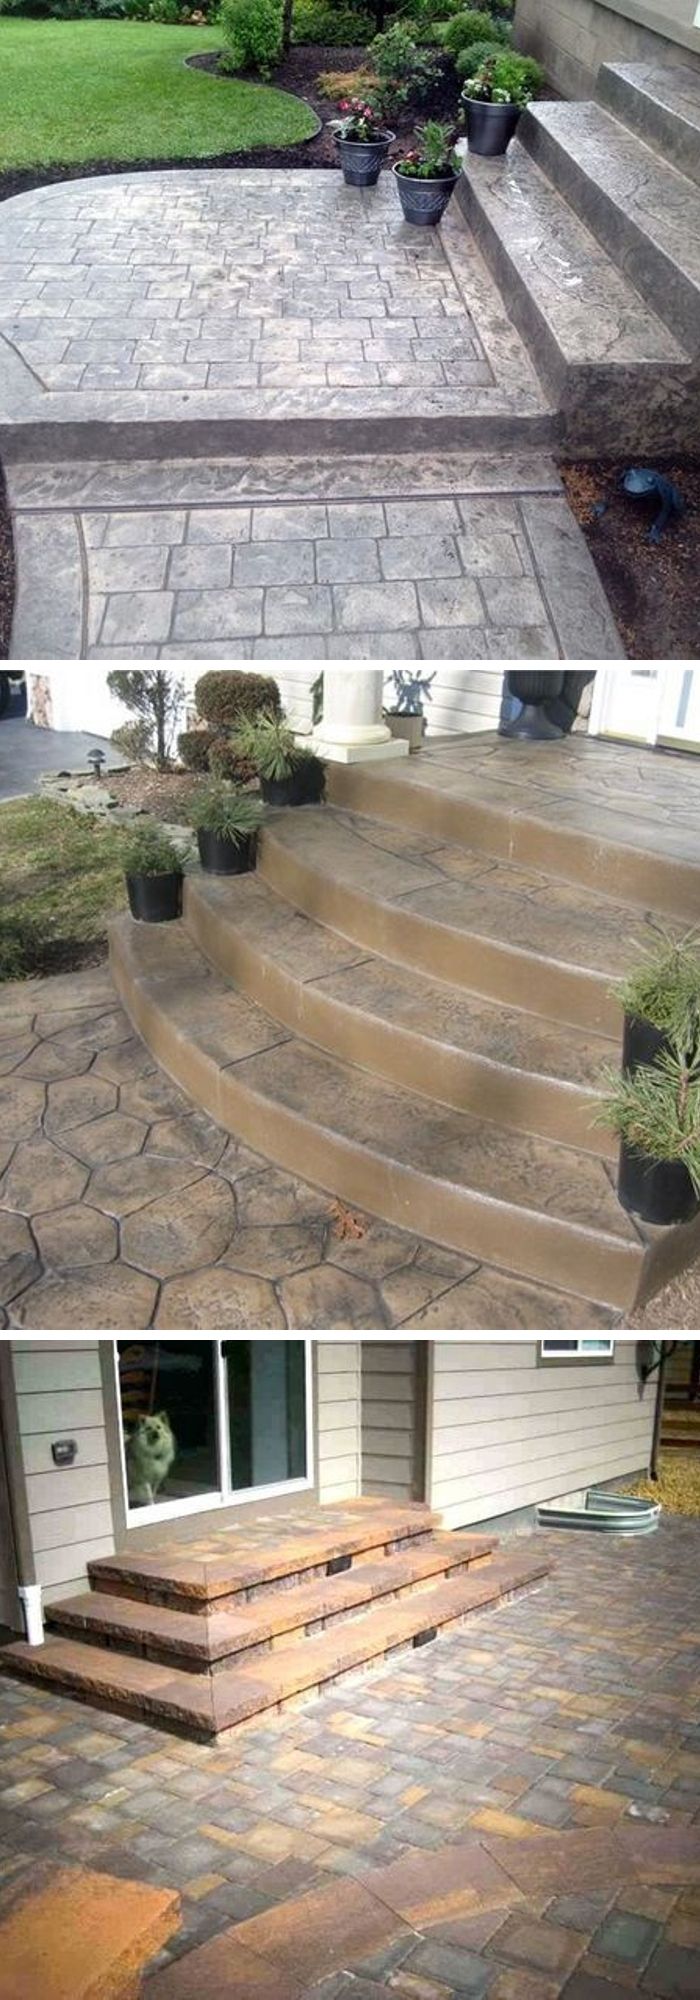 Stamped concrete patio steps